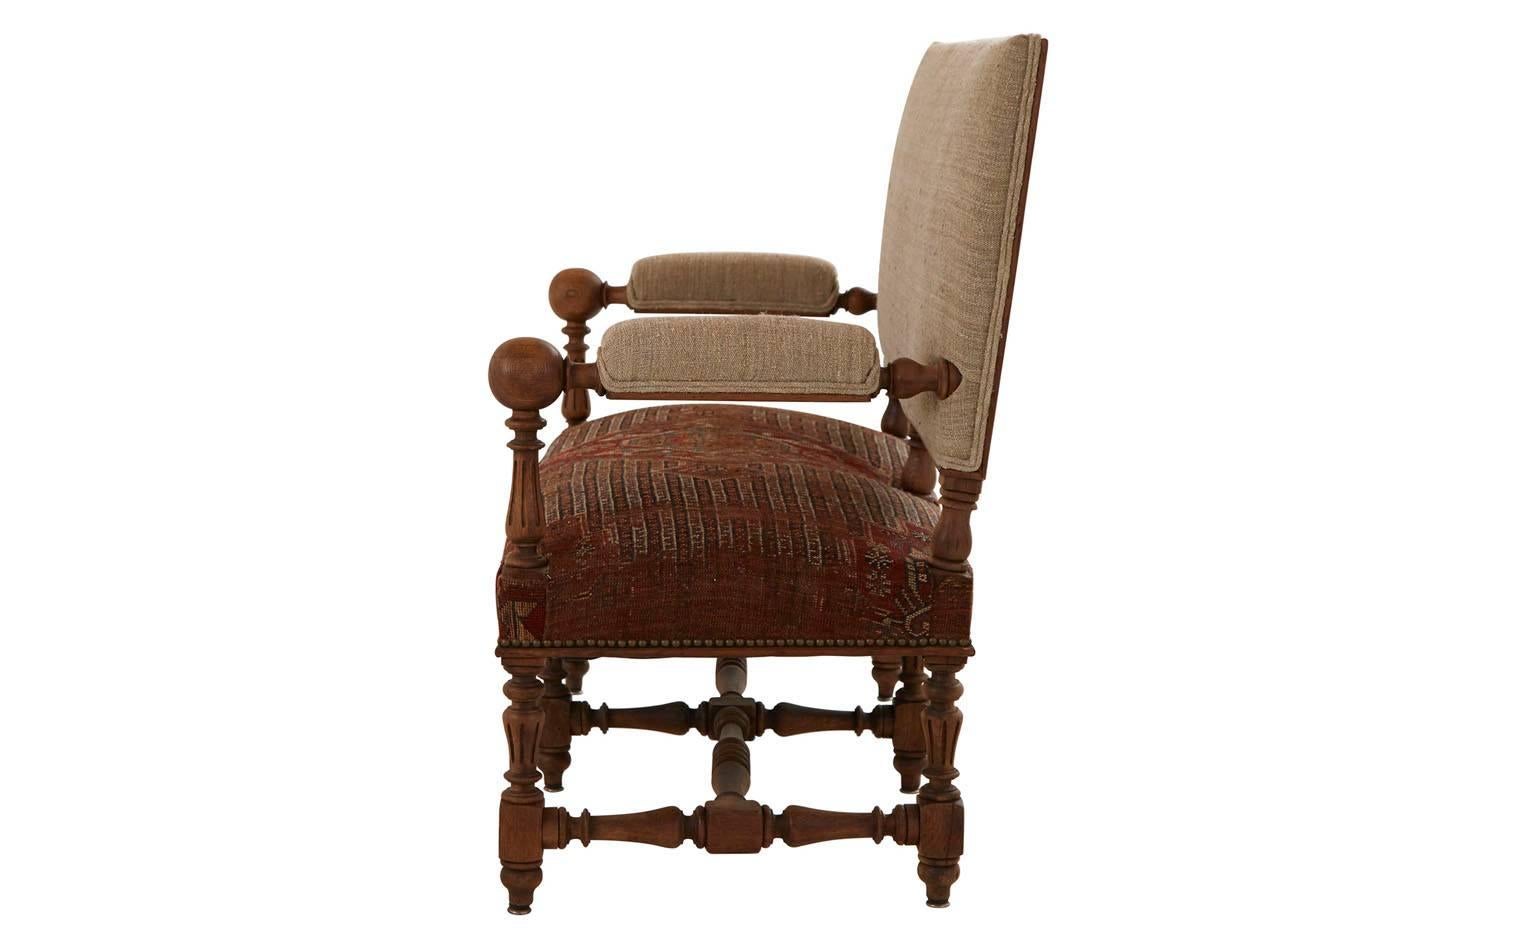 Reupholstered in vintage French tapestry and burlap
stripped wood frame
20th century
France

Dimensions
overall: 48